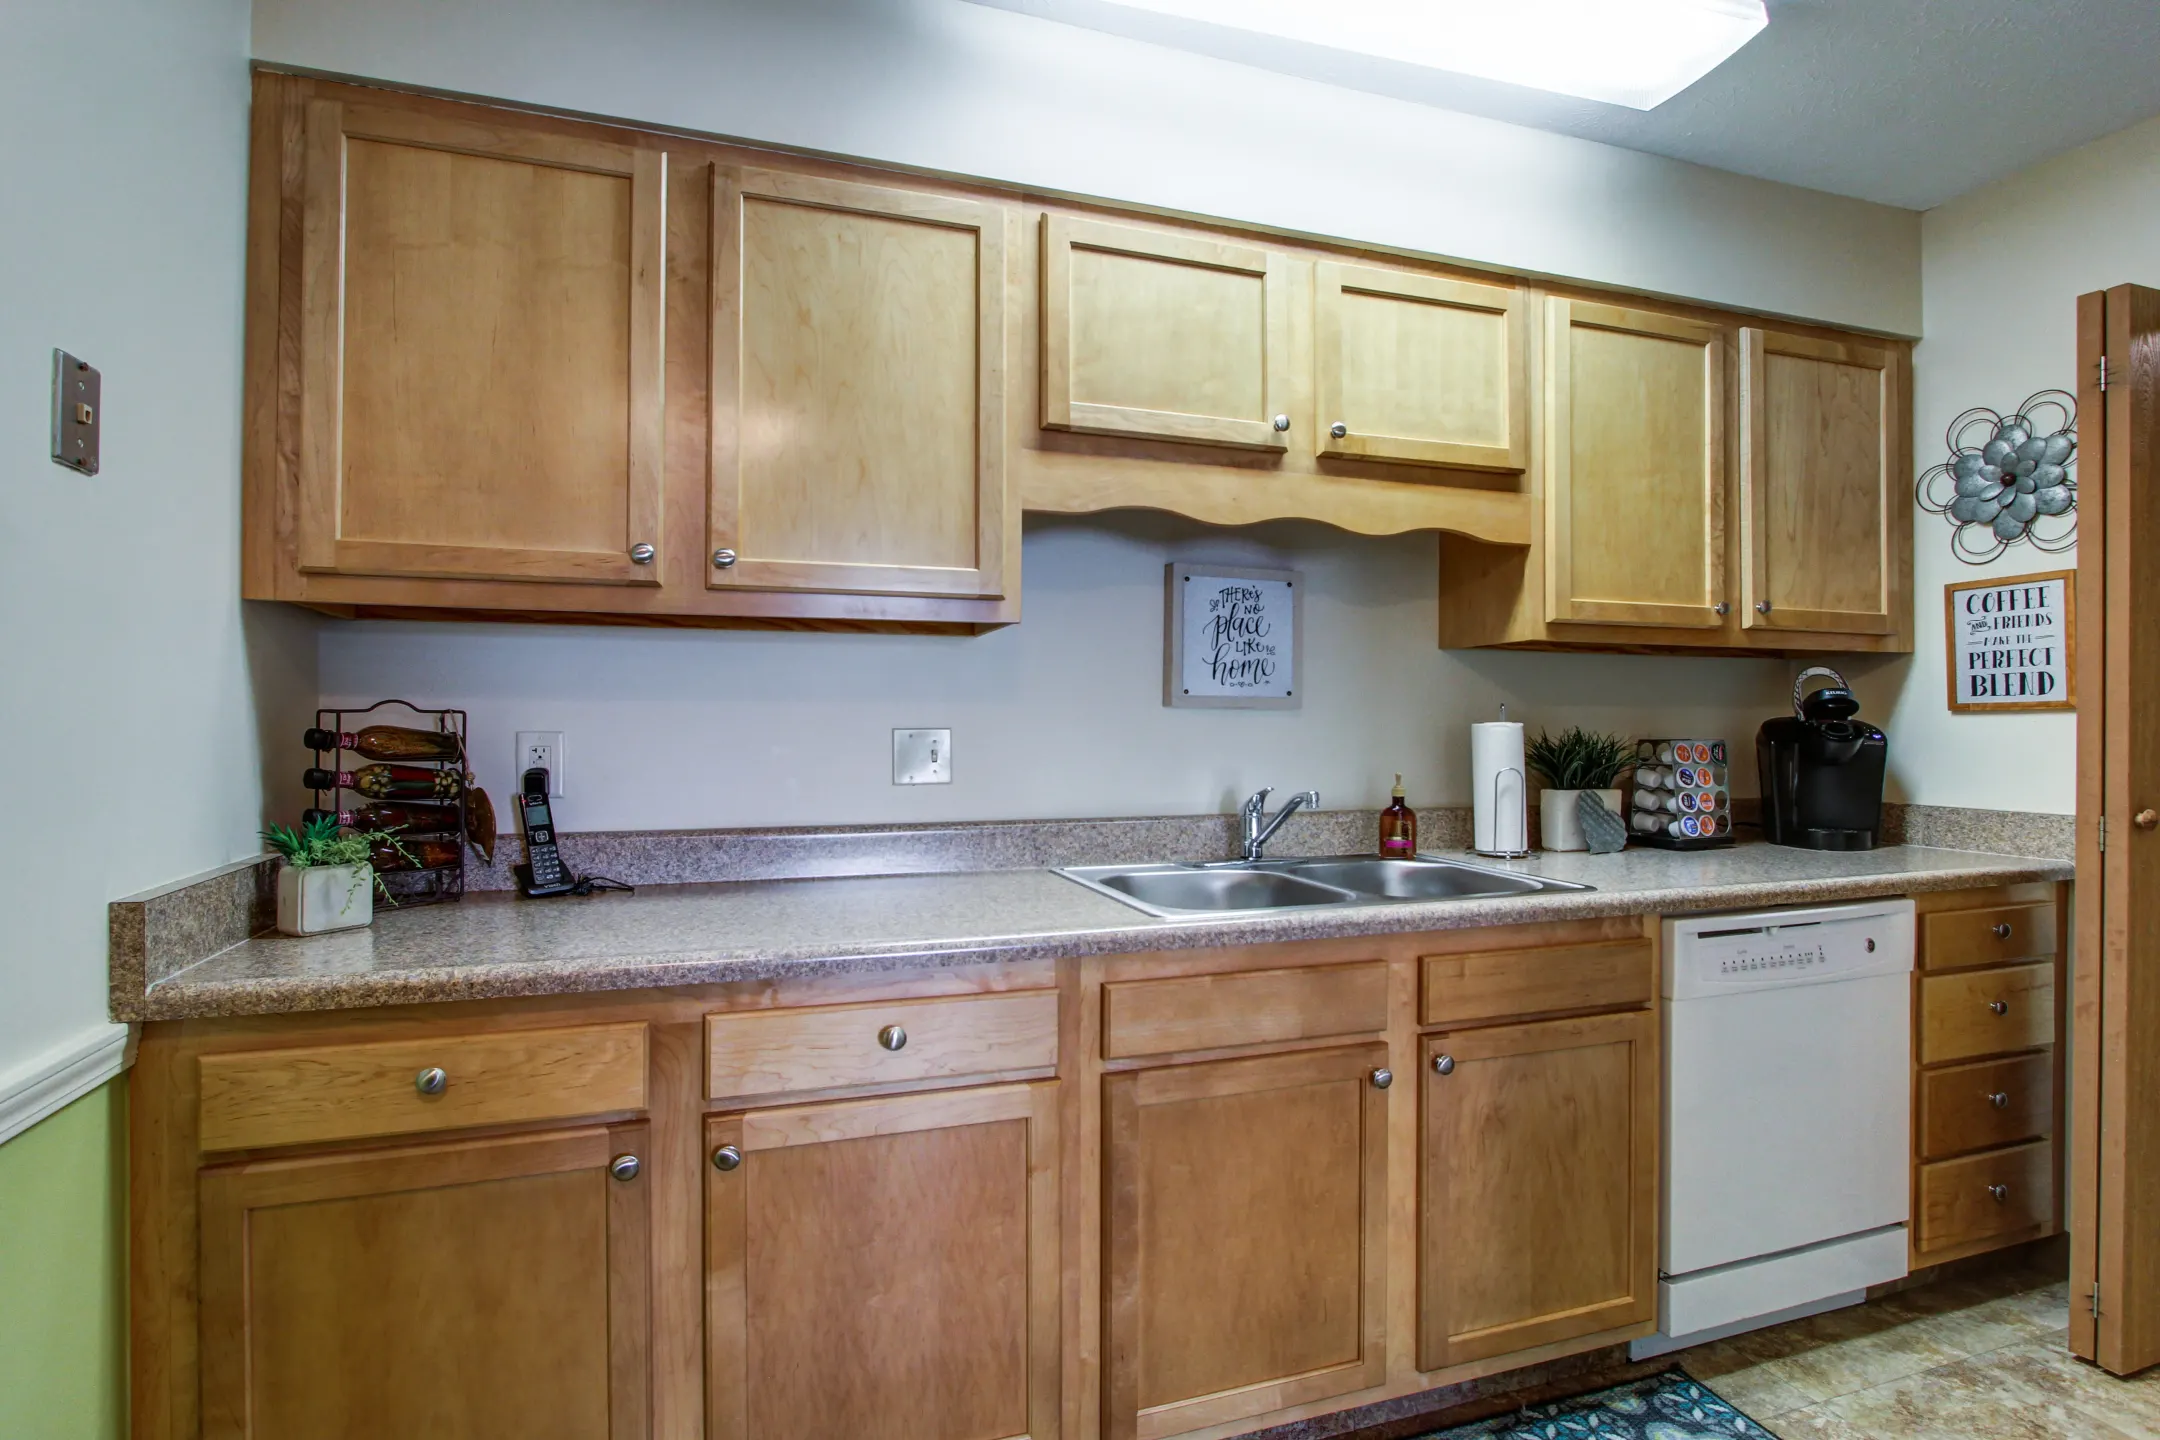 Kitchen - Cambridge Square Apartments - Youngstown, OH